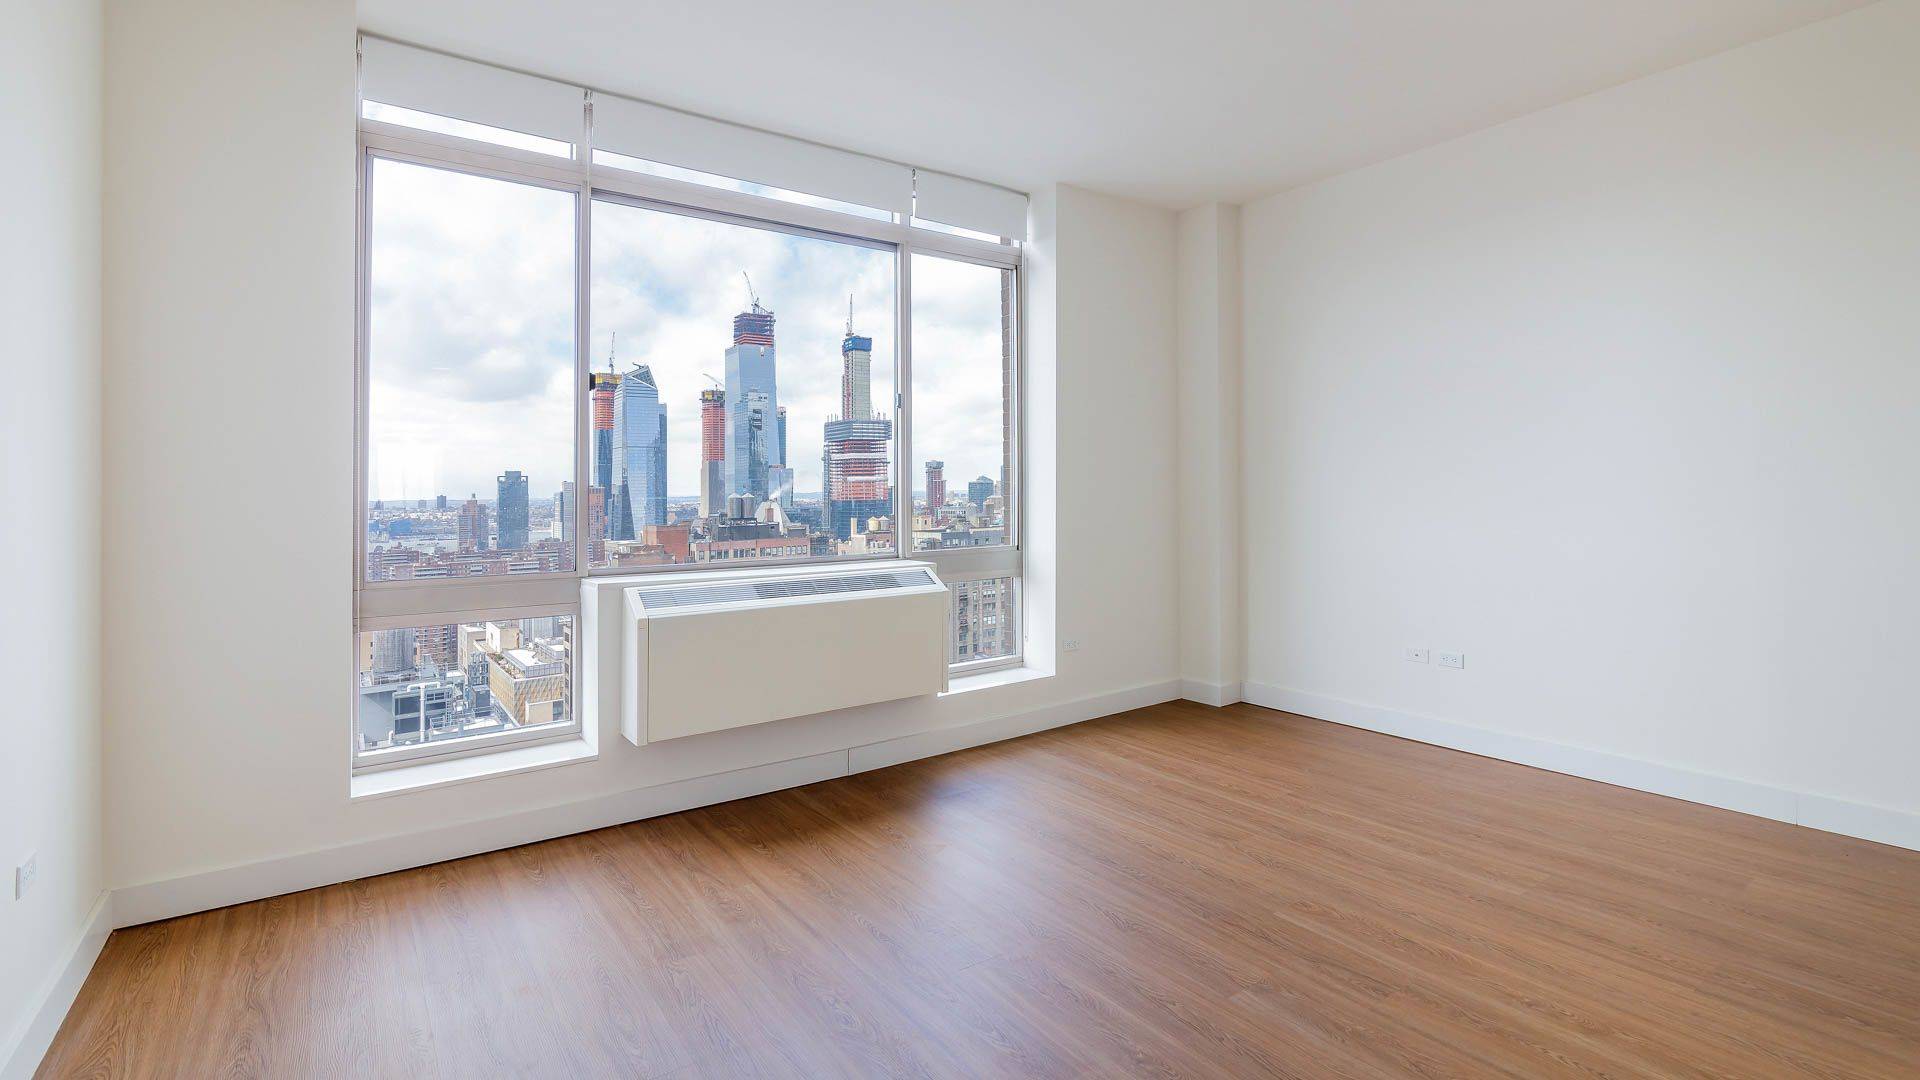 North/East Facing Penthouse One Bedroom with Views of Empire State Building in Chelsea